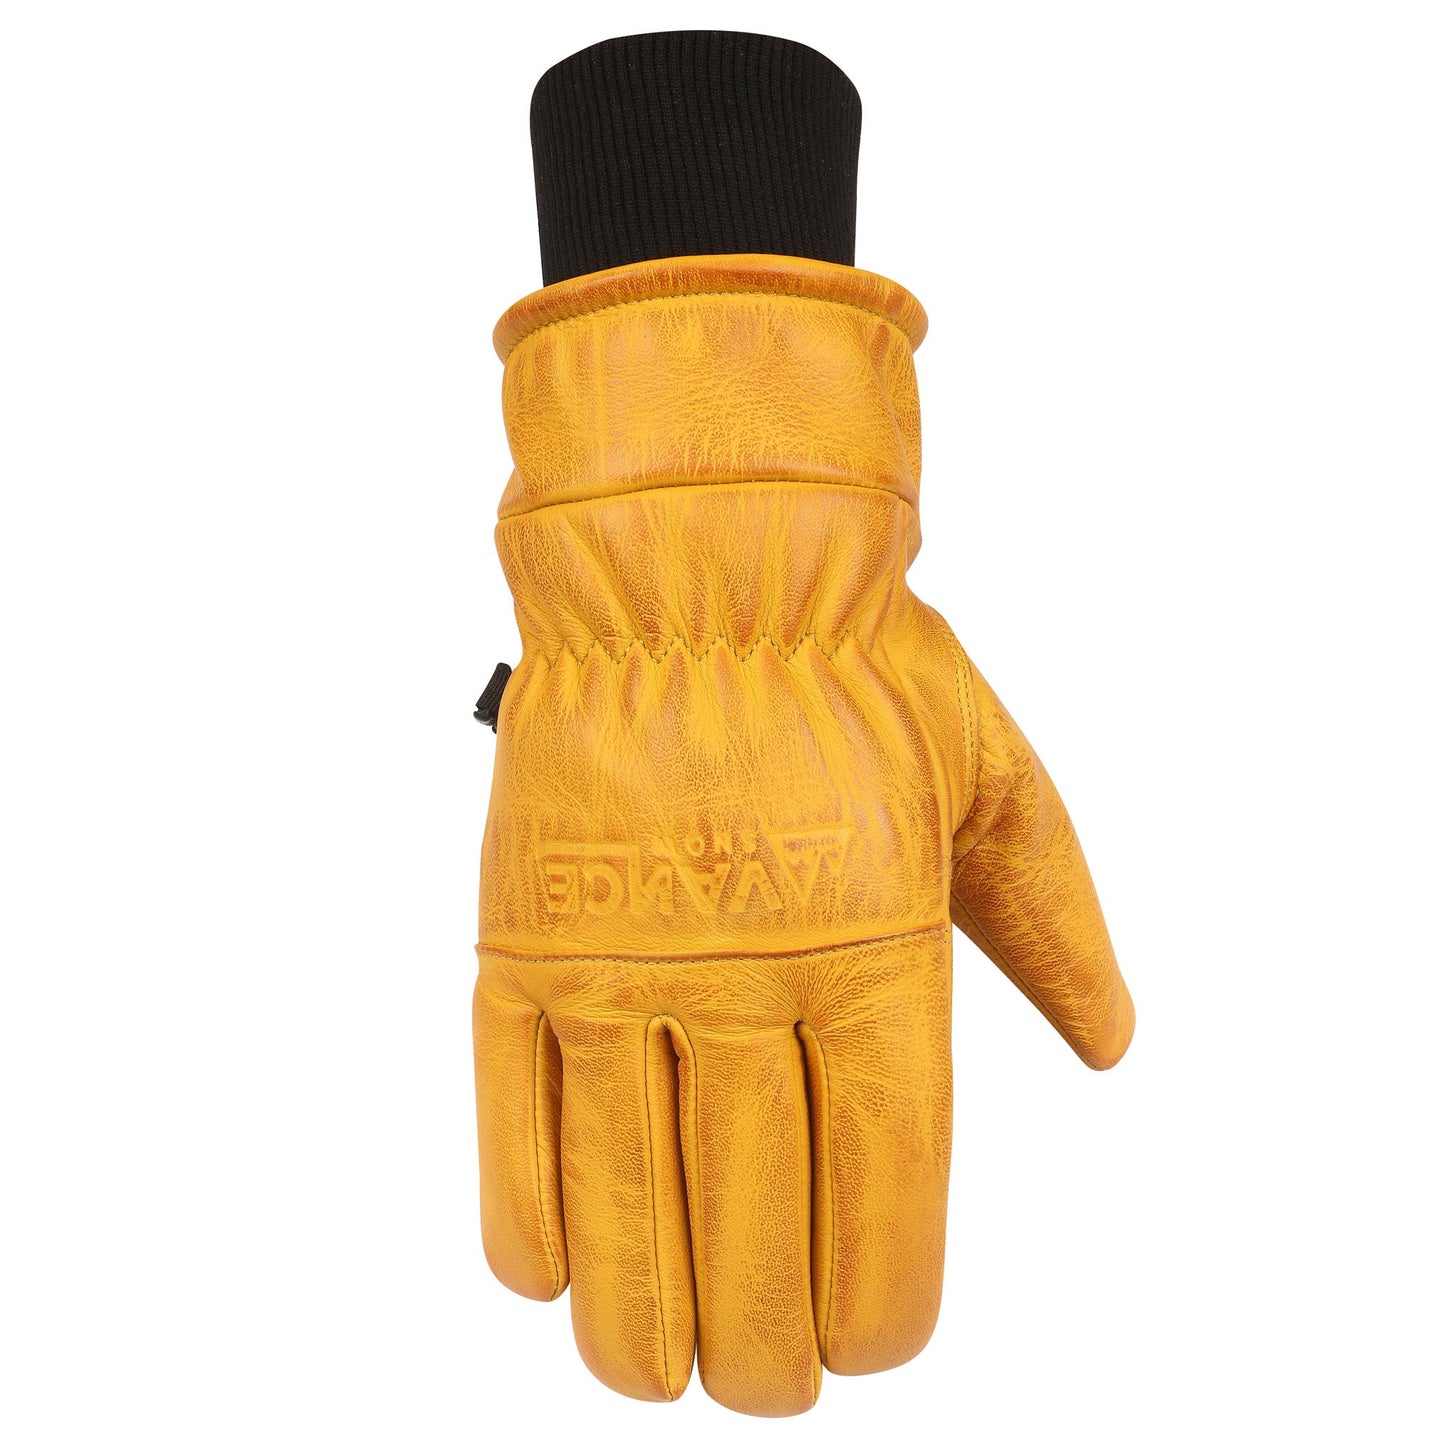 Vance Snow Mens Womens Unisex Goatskin Leather Insulated Winter Ski and Snowboard Gloves Tan Yellow Backhand